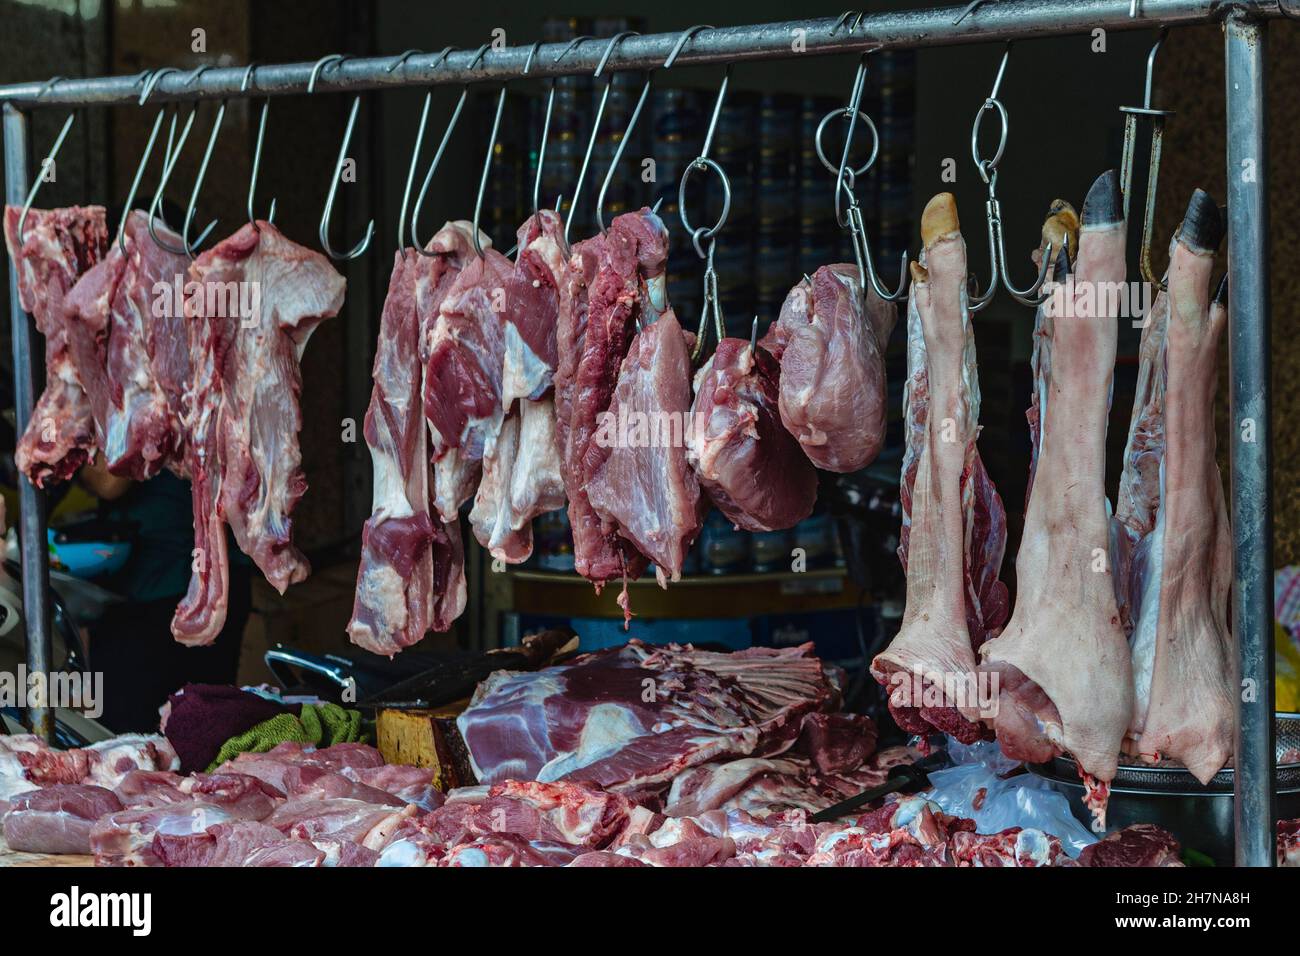 Pork meat hanged for sale in a street market in Can tho province , Vietnam Stock Photo